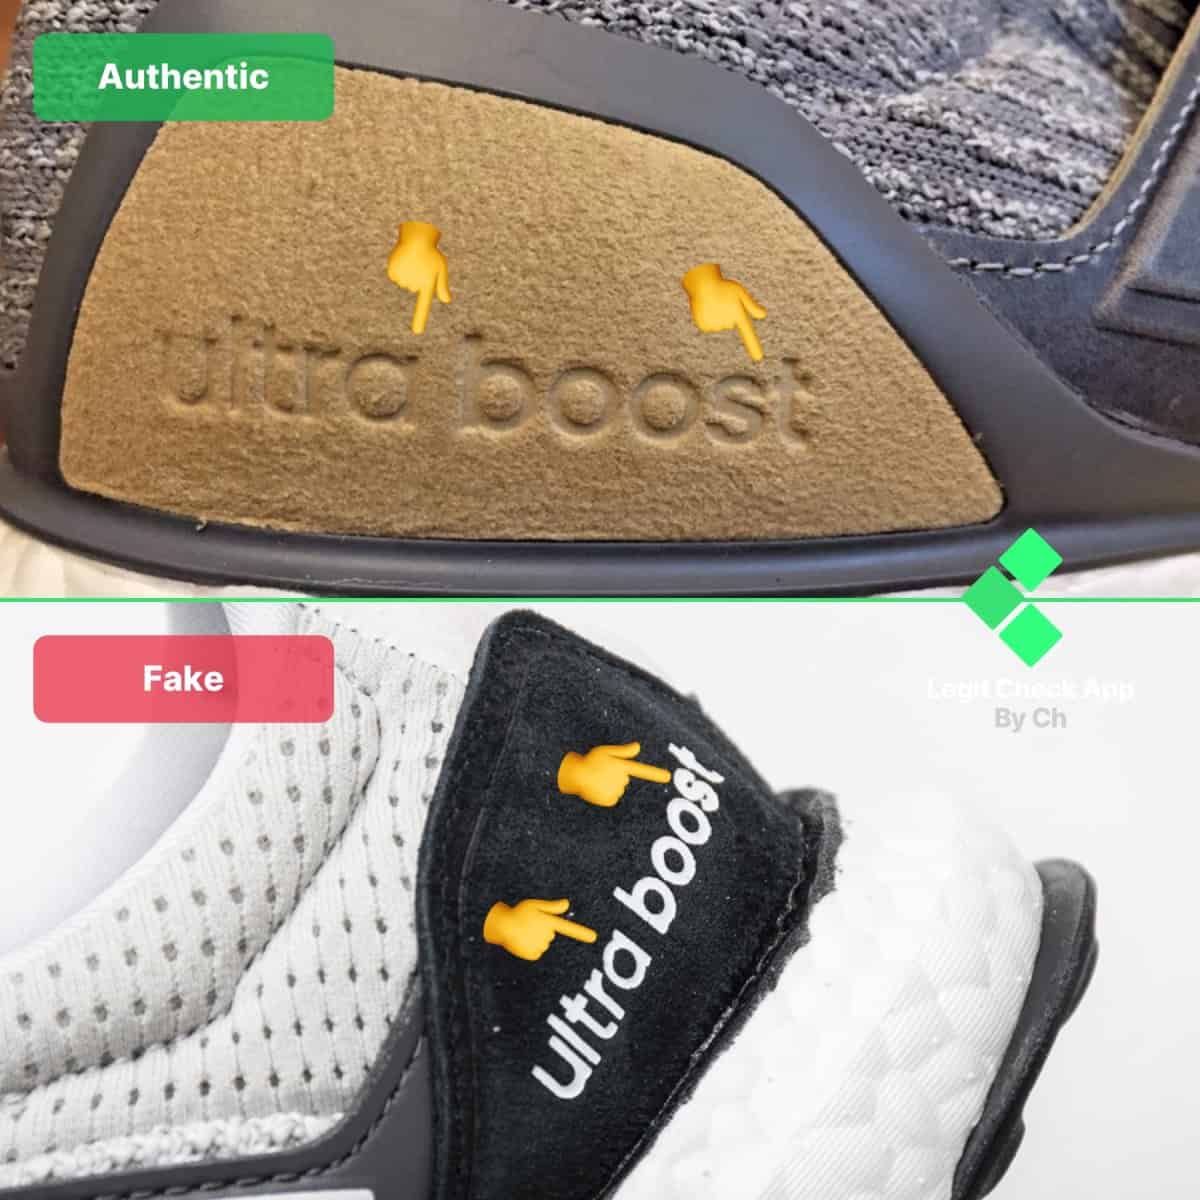 how to spot fake utraboost